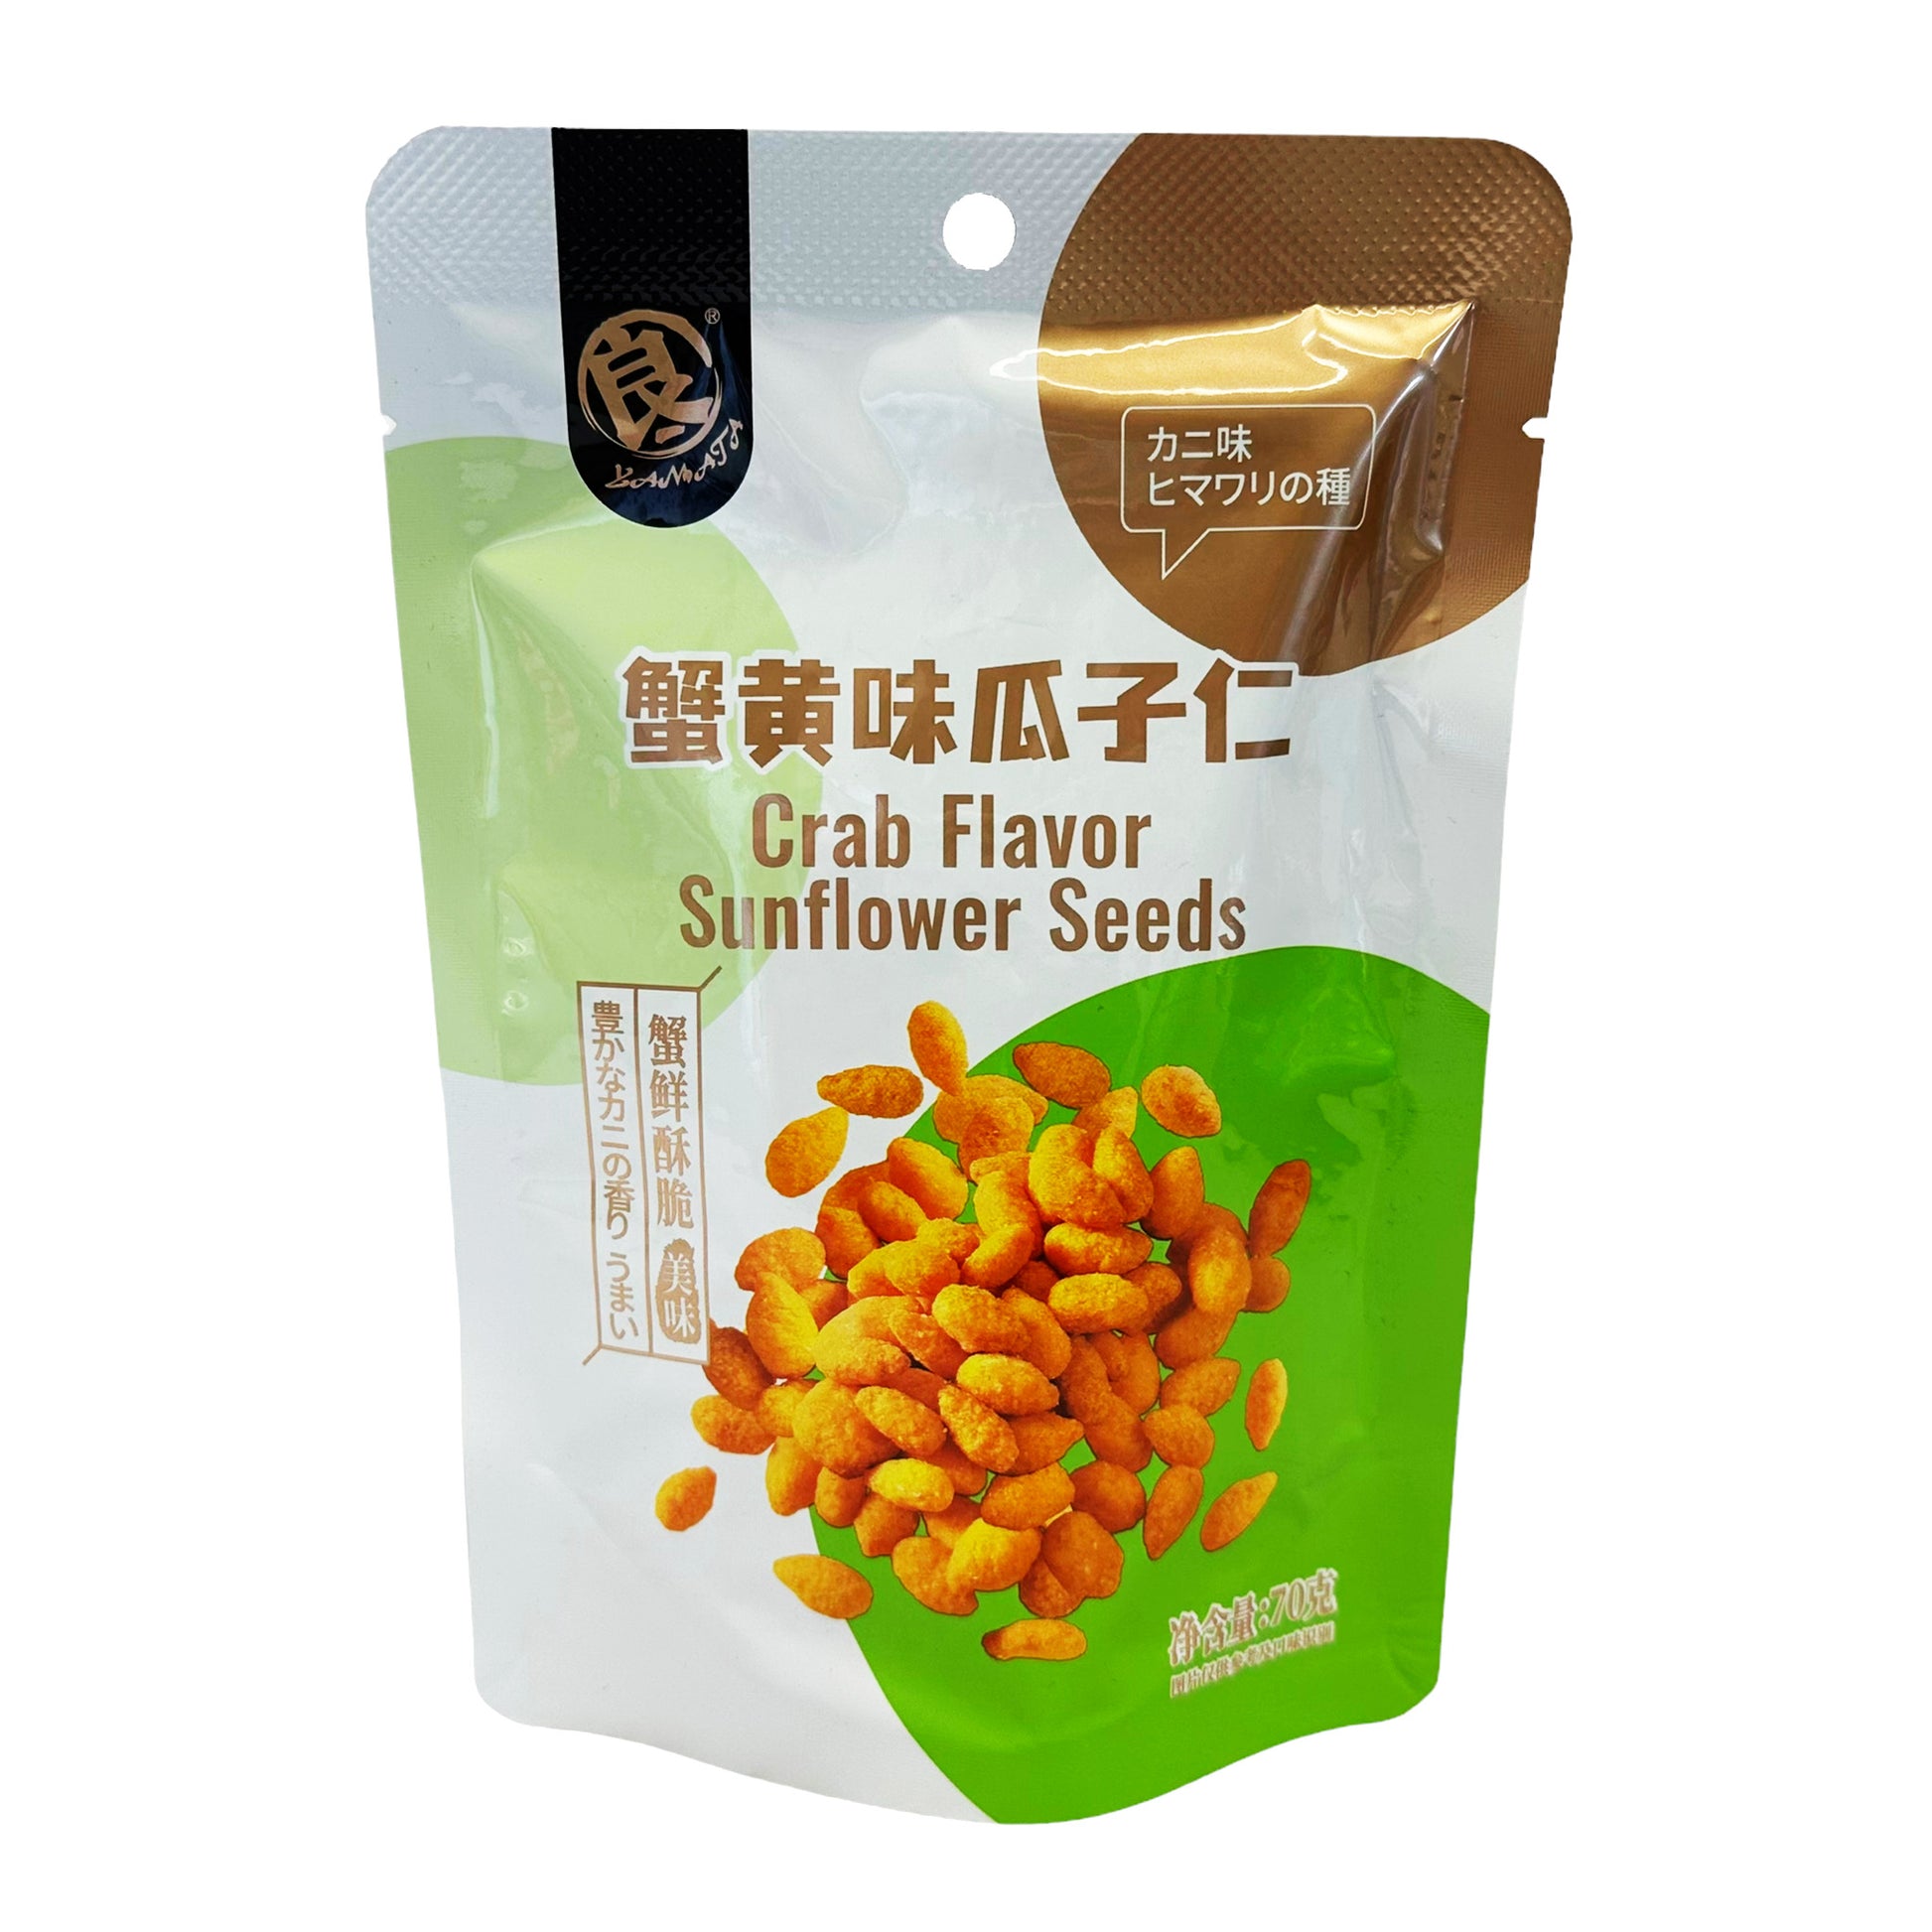 Front graphic image of Yamata Crab Flavor Sunflower Seeds 2.46oz (70g)